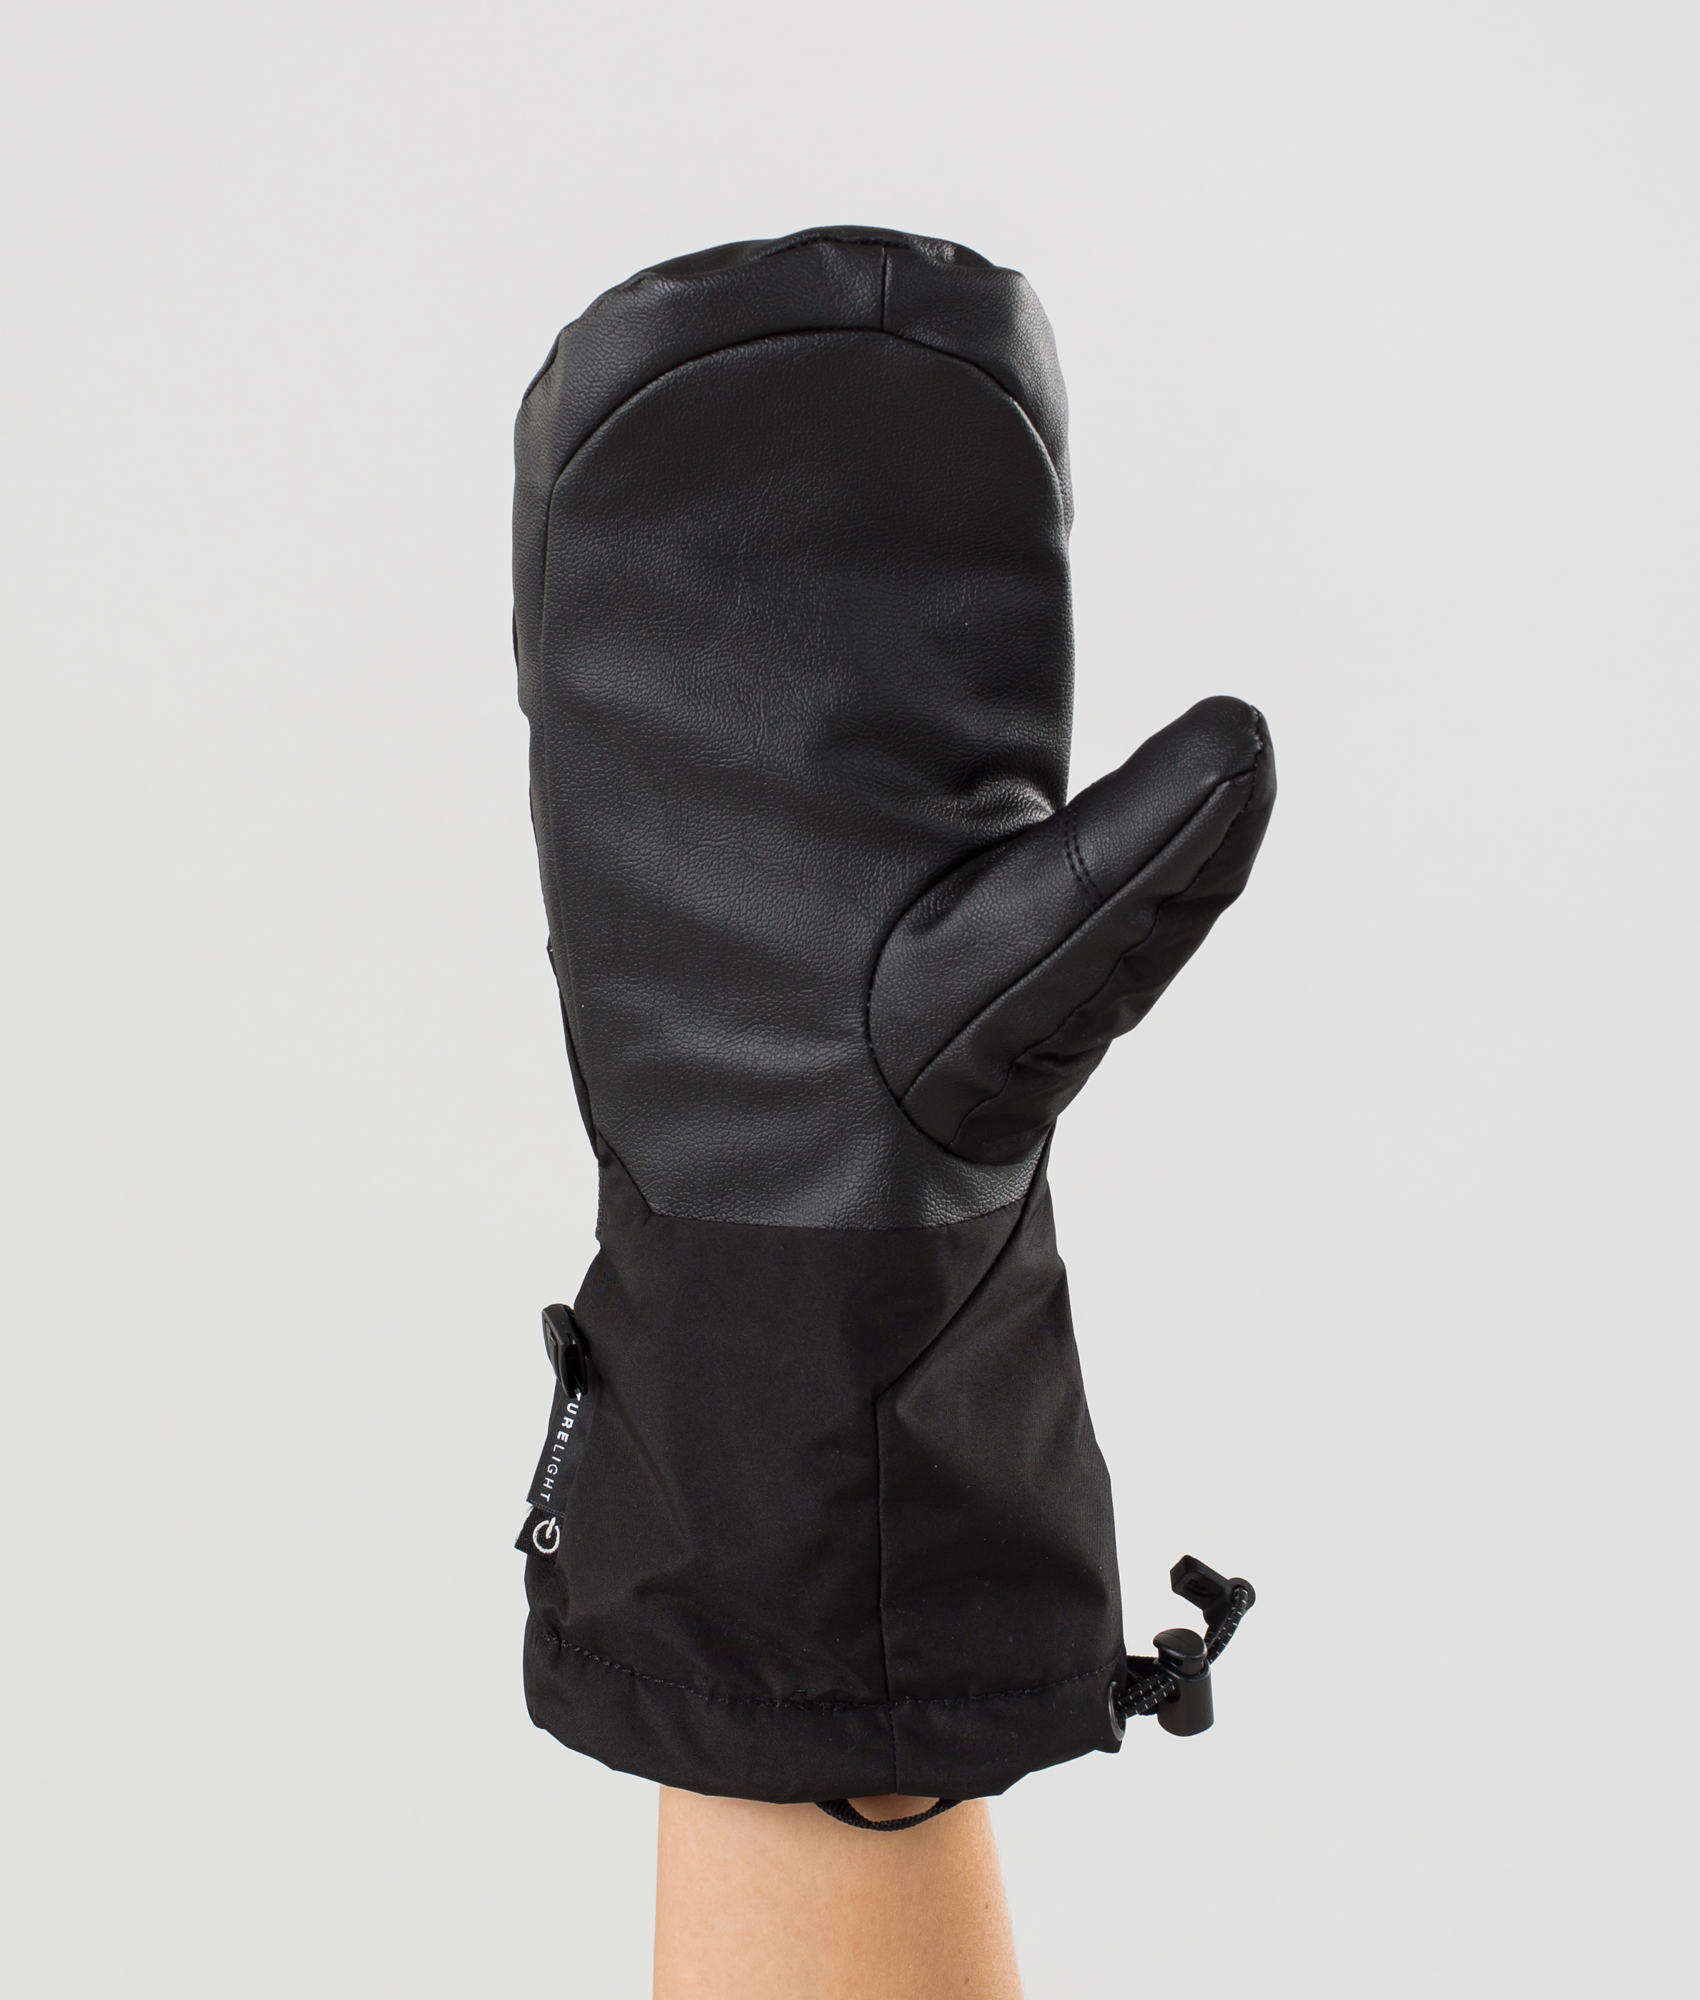 north face mitts